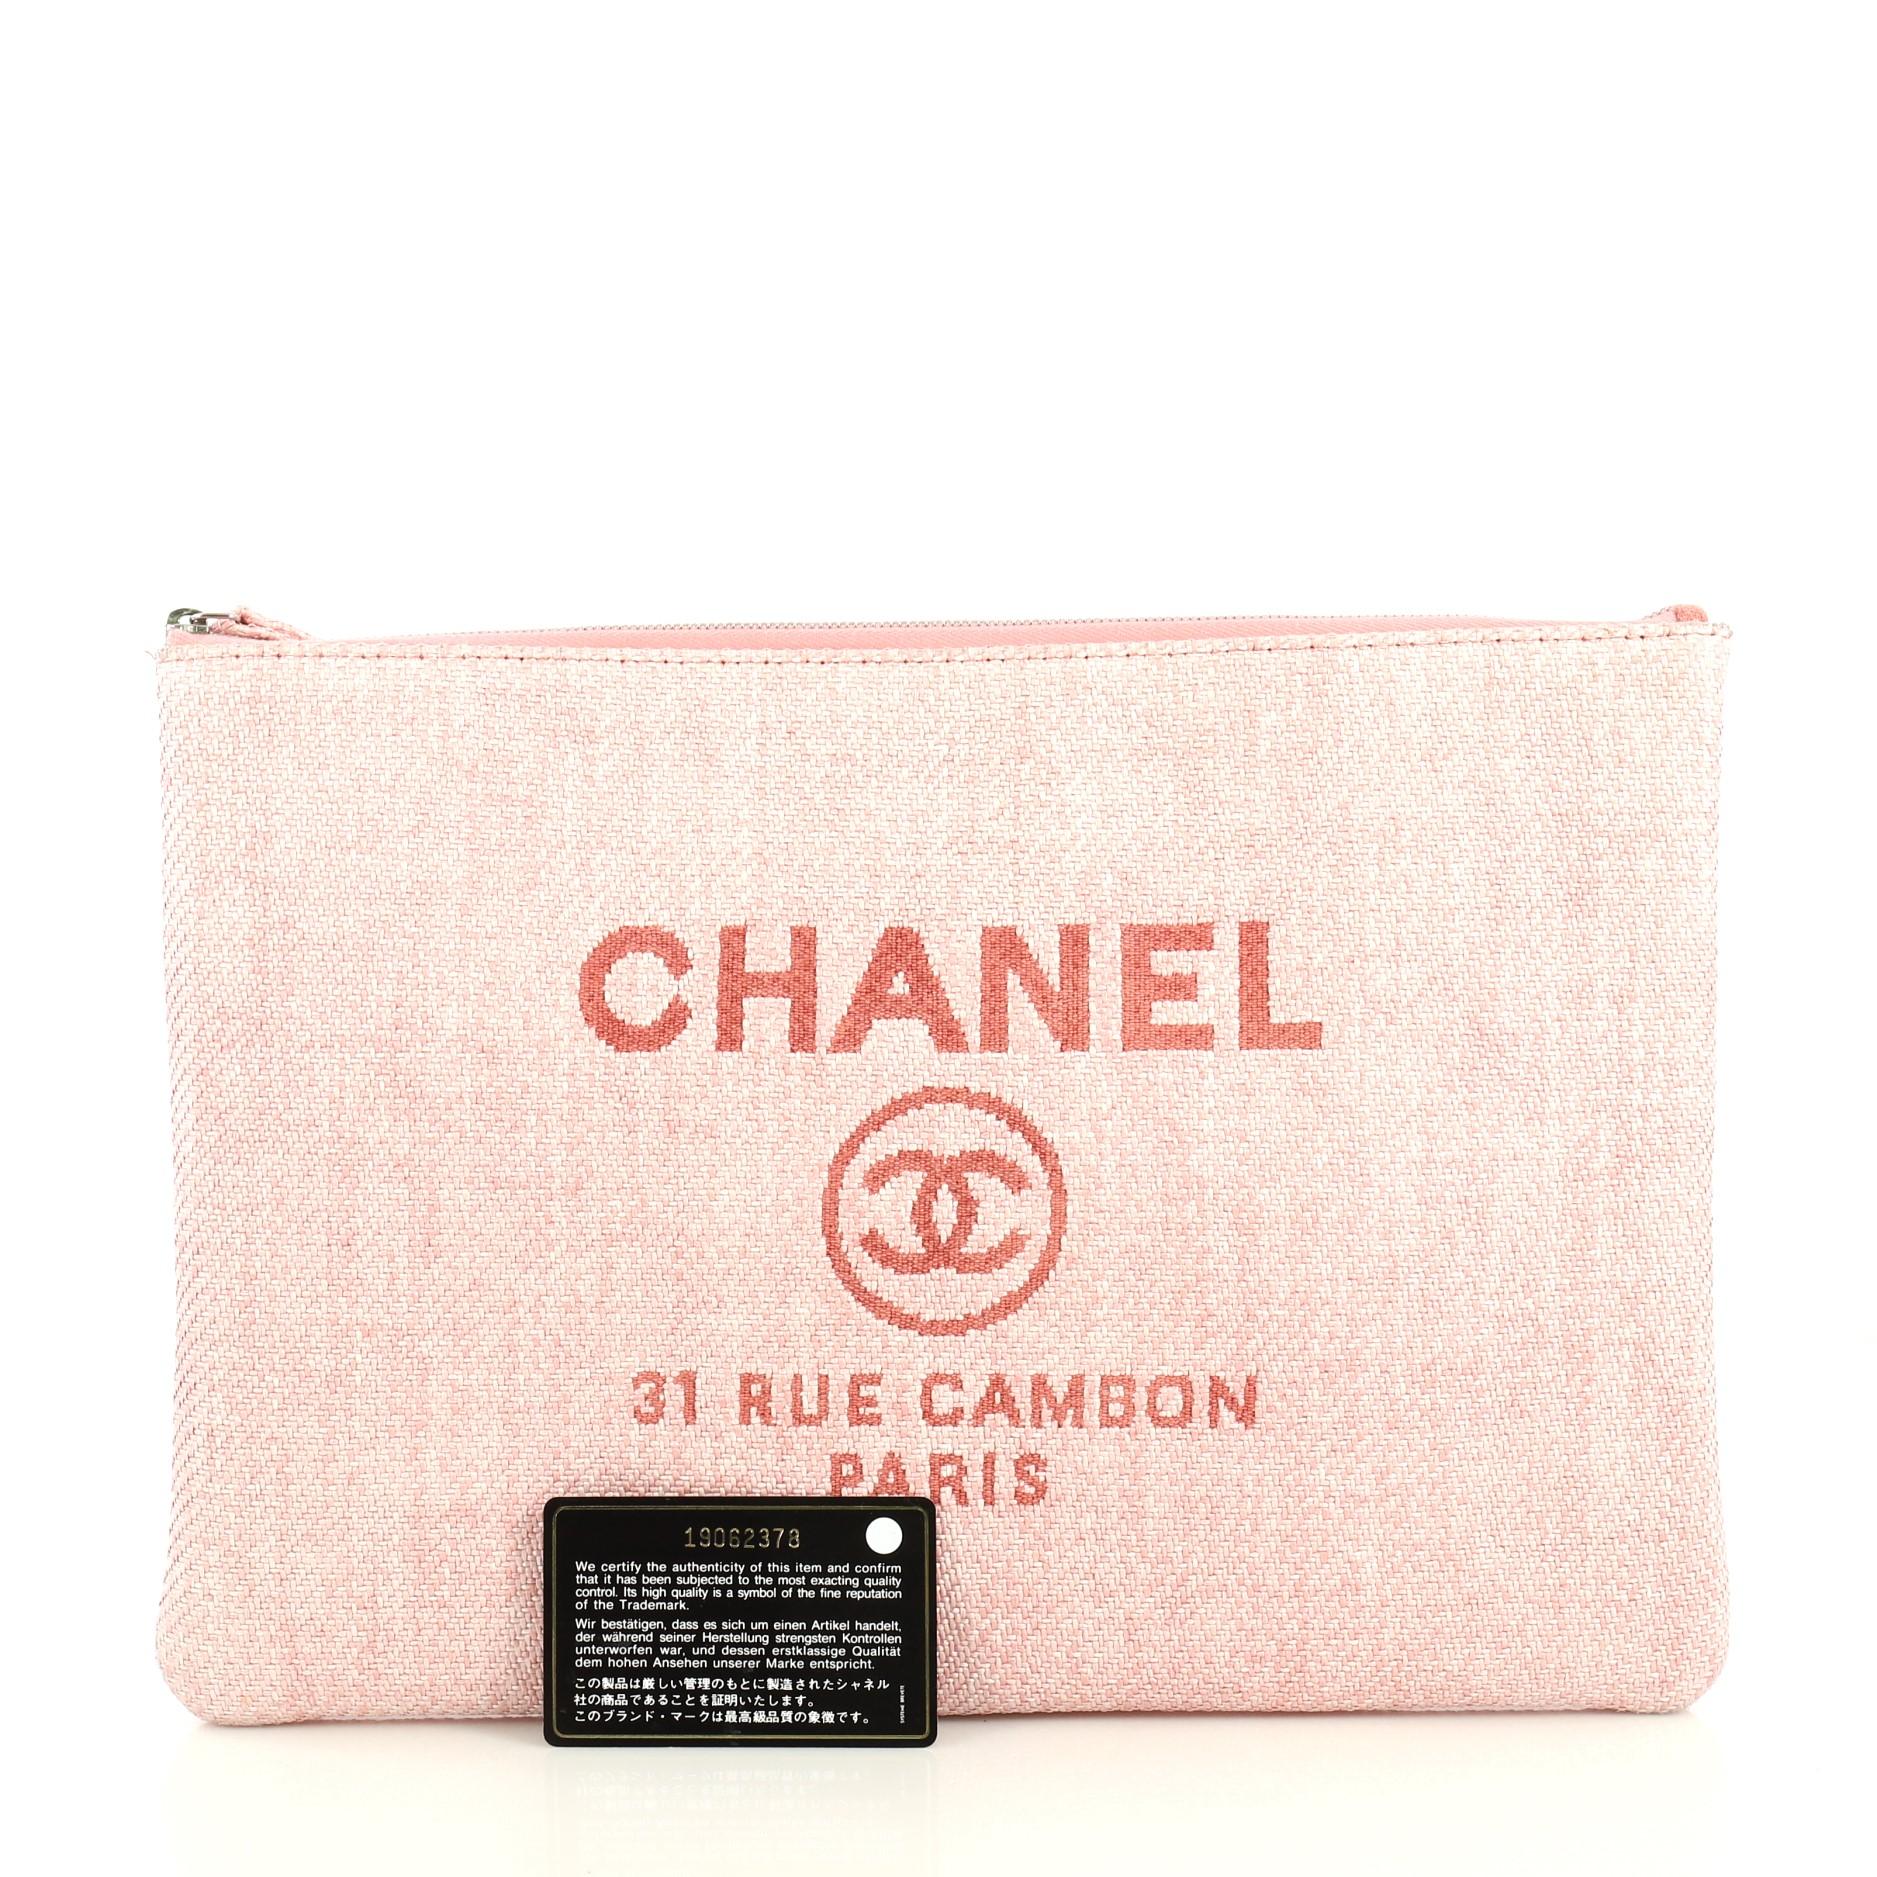 This Chanel Deauville Pouch Raffia Large, crafted in pink raffia, Chanel logo detailing and silver-tone hardware. Its zip closure opens to a neutral fabric interior. Hologram sticker reads: 19062378.

Condition: Good. Moderate wear on base and